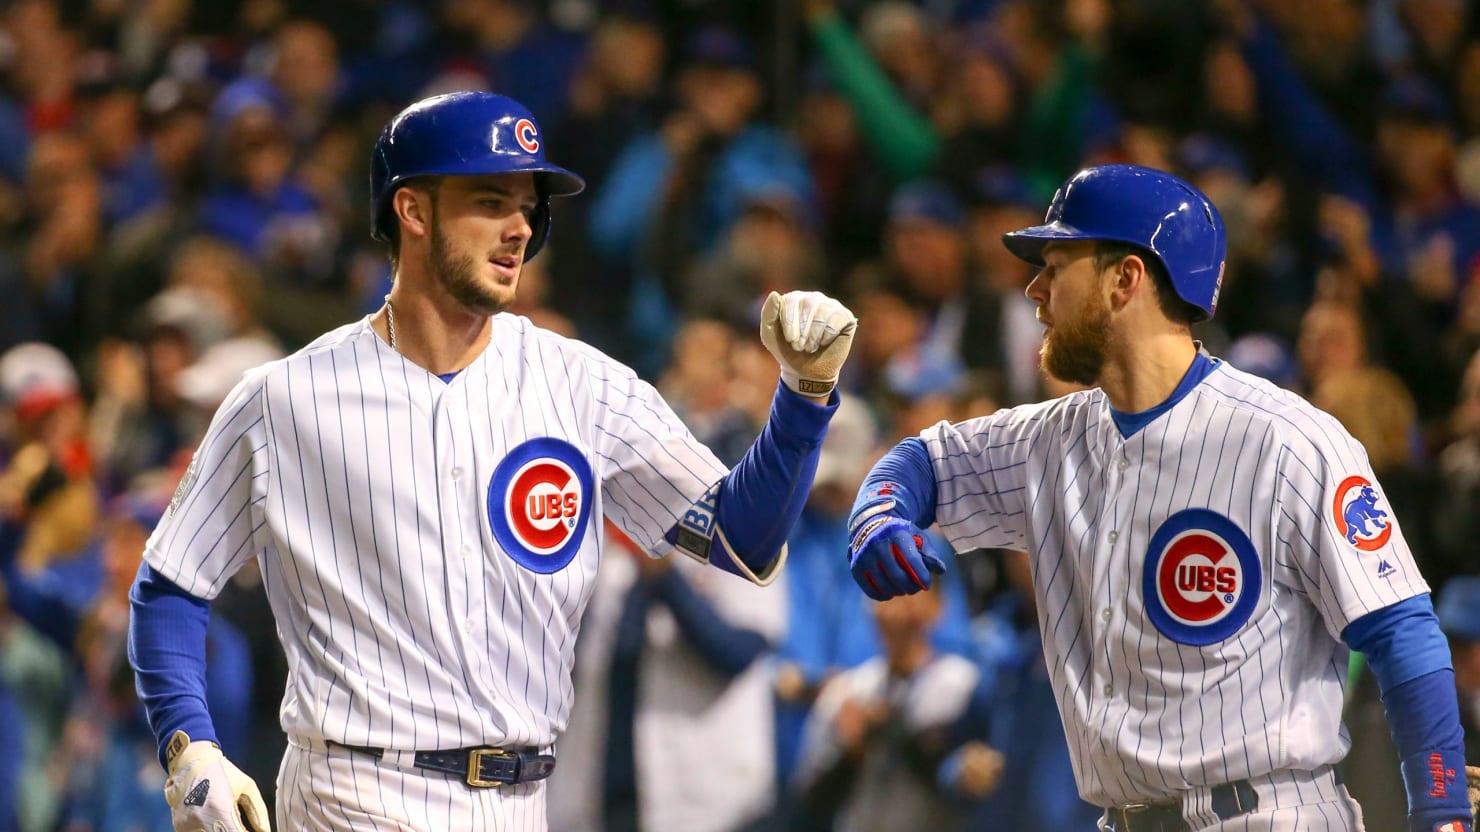 Game 7 2016 World Series Chicago Cubs Vs Cleveland Indians Live Stream And Full Schedule